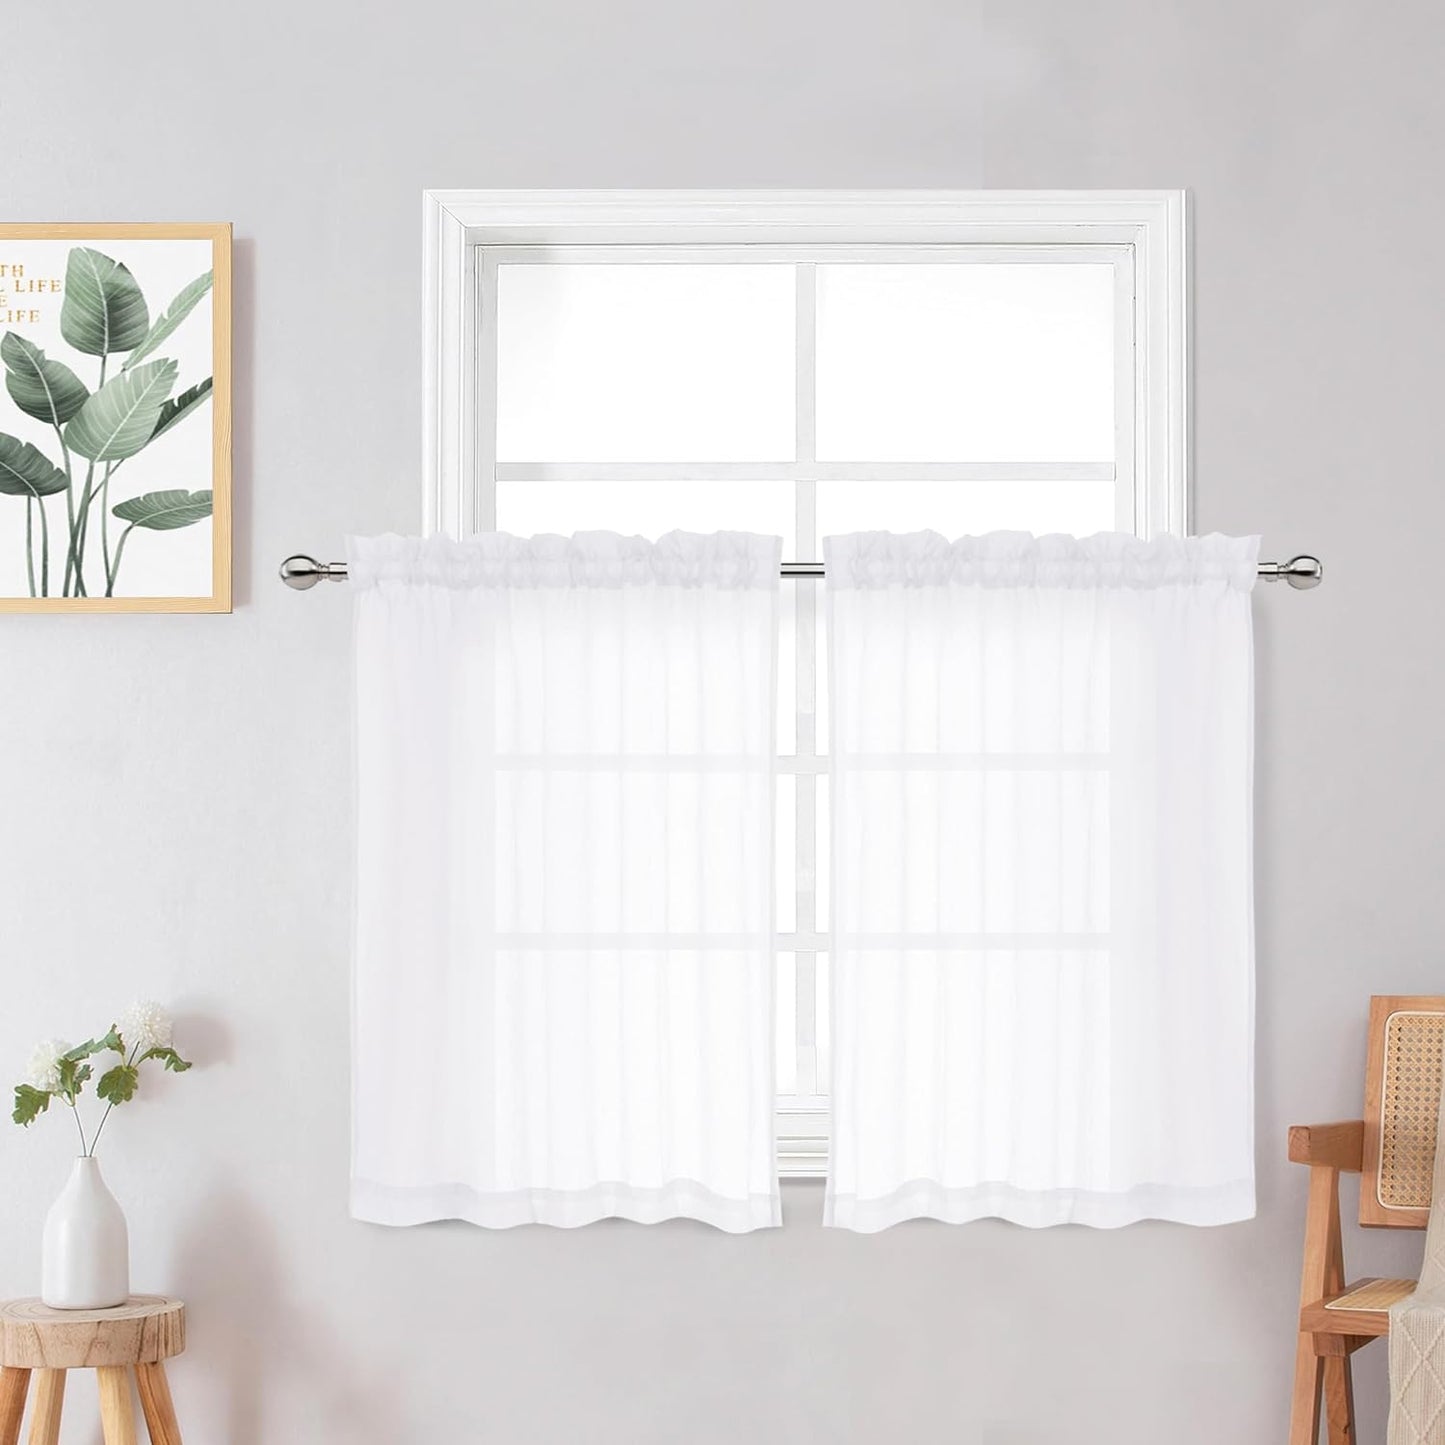 Crushed Sheer White Curtains 63 Inch Length 2 Panels, Light Filtering Solid Crinkle Voile Short Sheer Curtian for Bedroom Living Room, Each 42Wx63L Inches  Chyhomenyc White 28 W X 24 L 